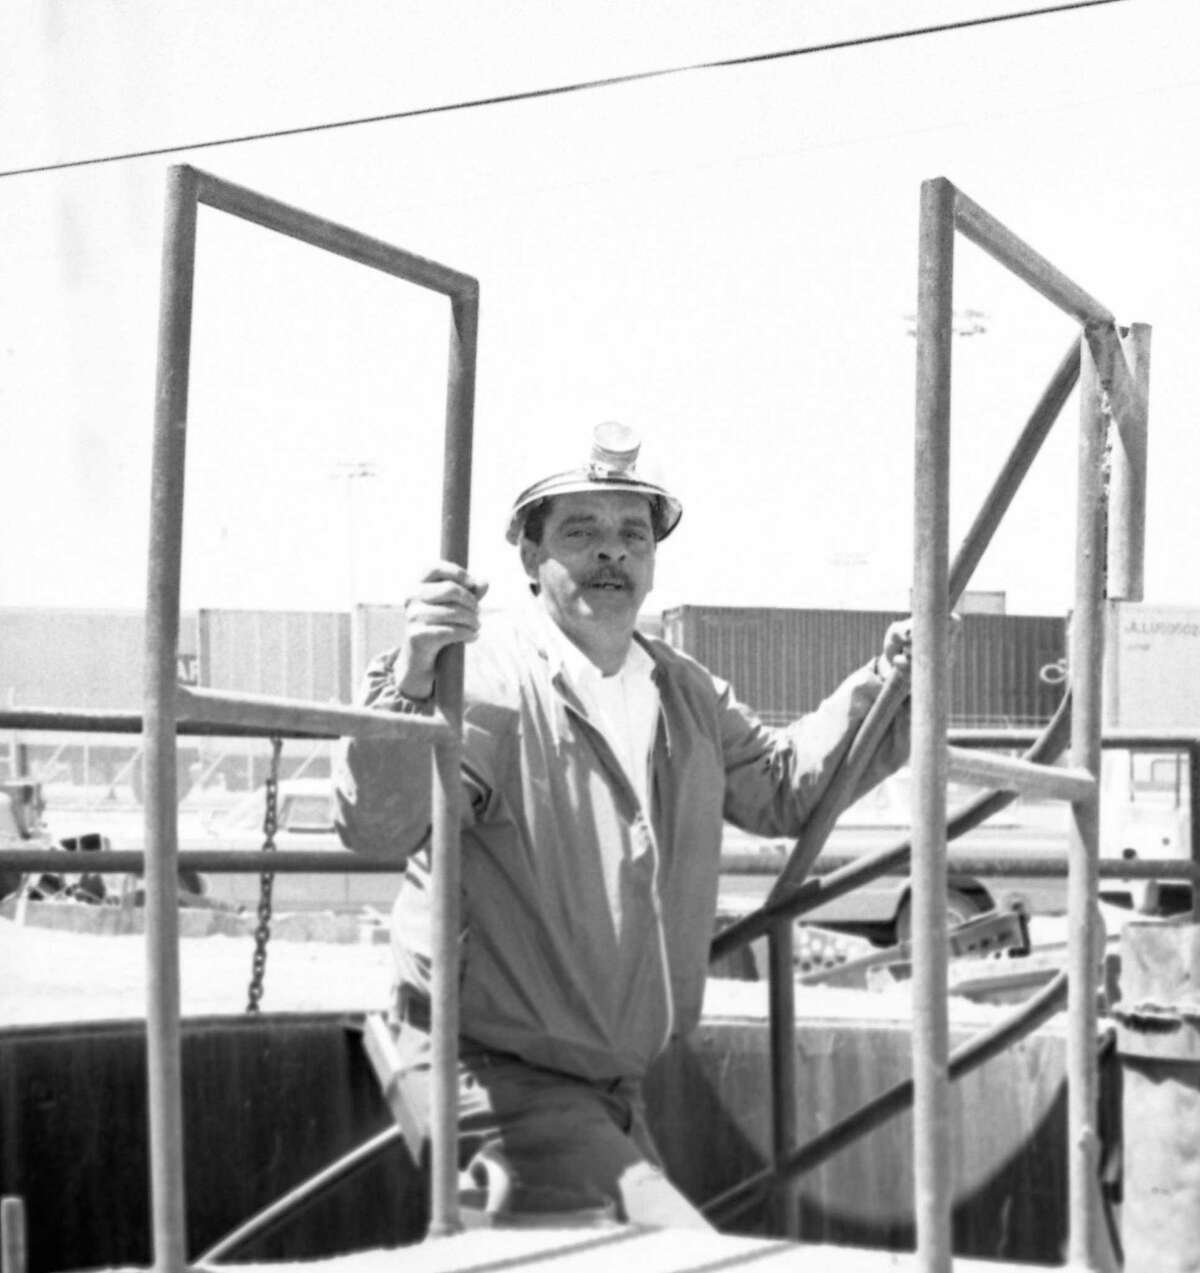 May 19, 1969: BART engineer Don Hughes completes the first walk through the BART Transbay Tube from San Francisco to Oakland.